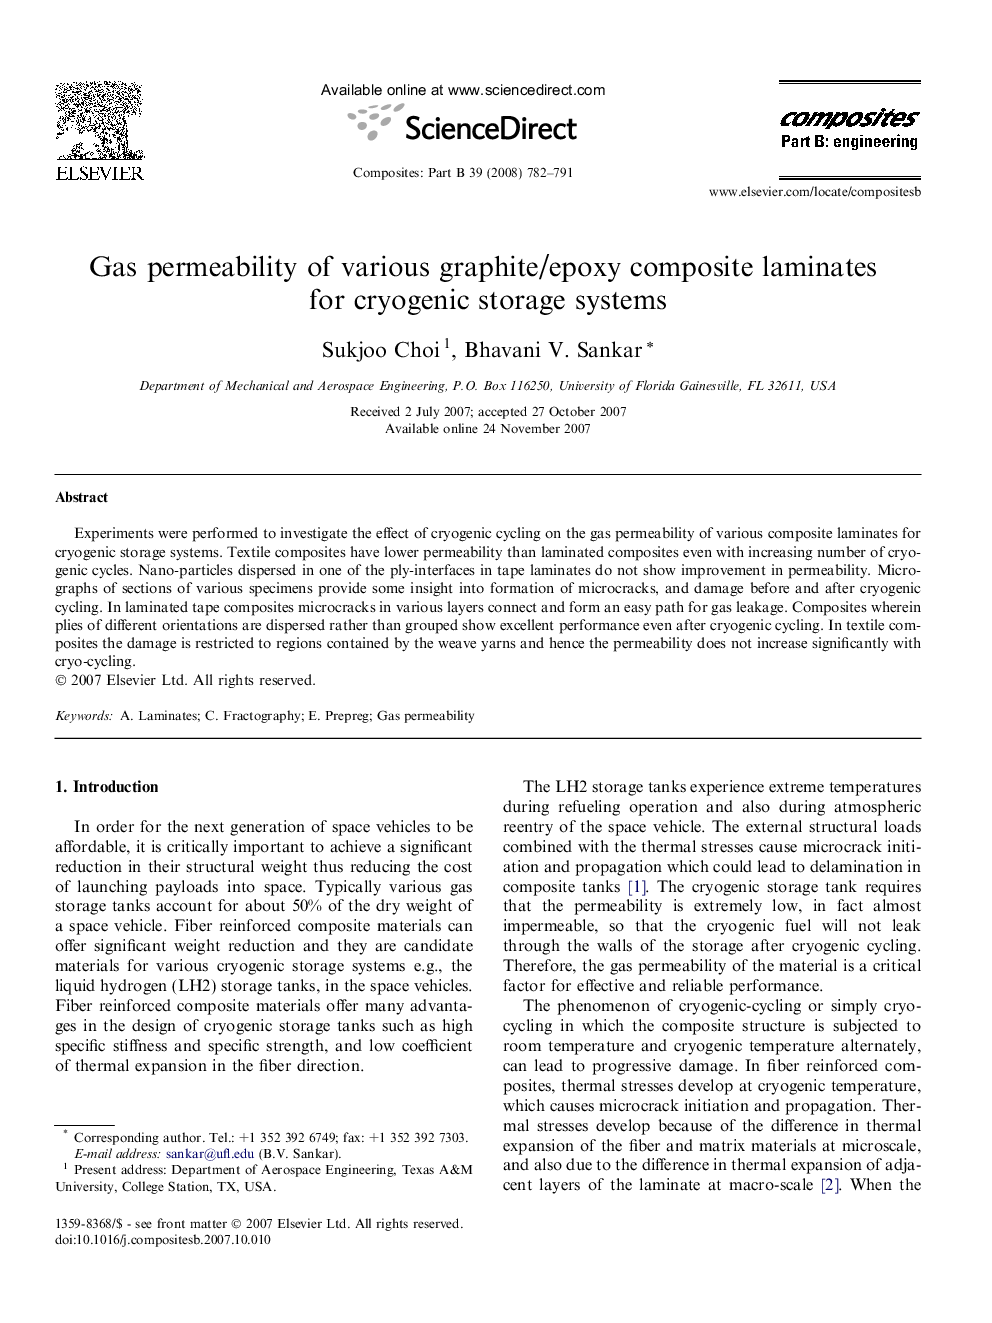 Gas permeability of various graphite/epoxy composite laminates for cryogenic storage systems